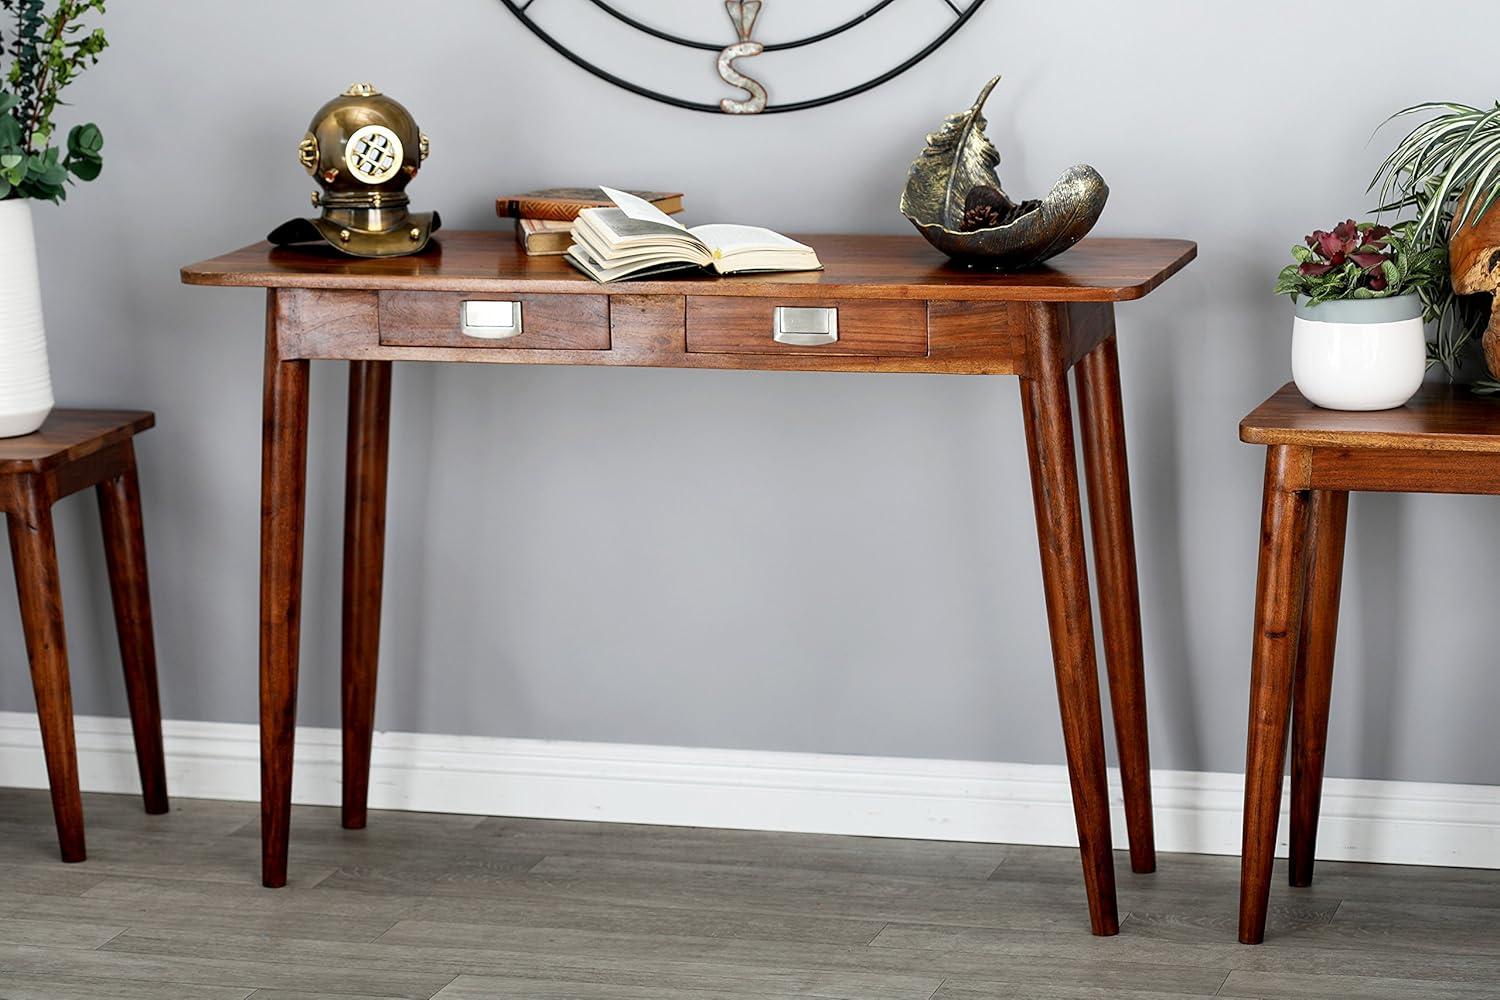 Kanaloa Dark Brown Solid Wood Console Table with Silver Handles, 50.75"L